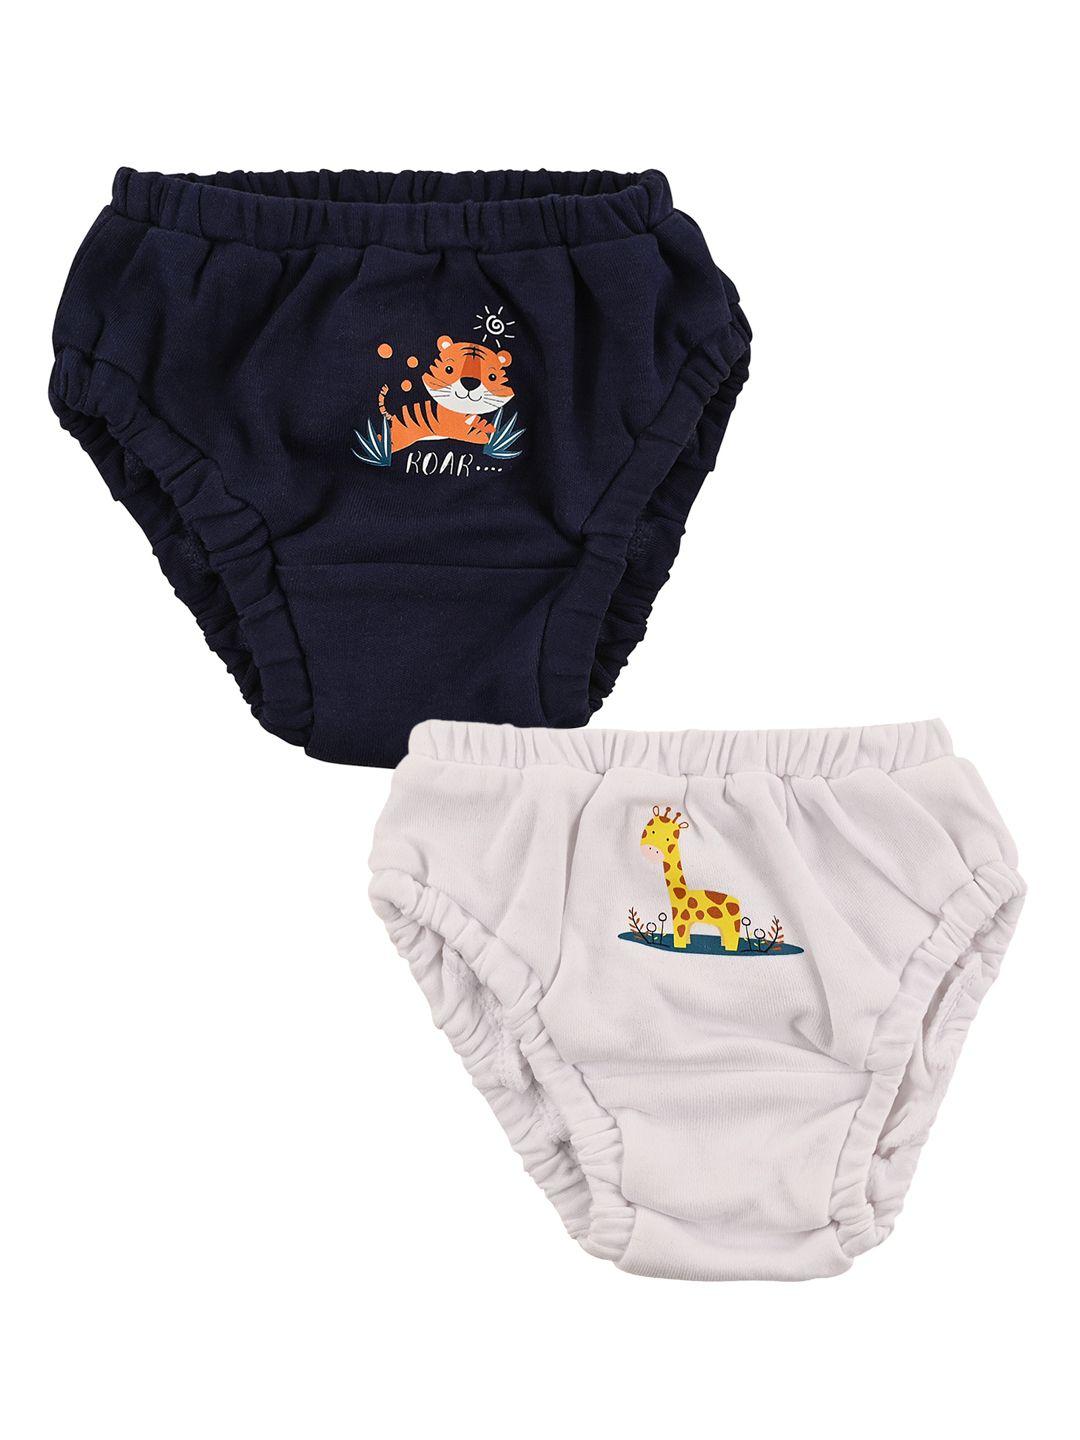 Nuluv Boys Pack of 2 Assorted Pure Cotton Basic Briefs